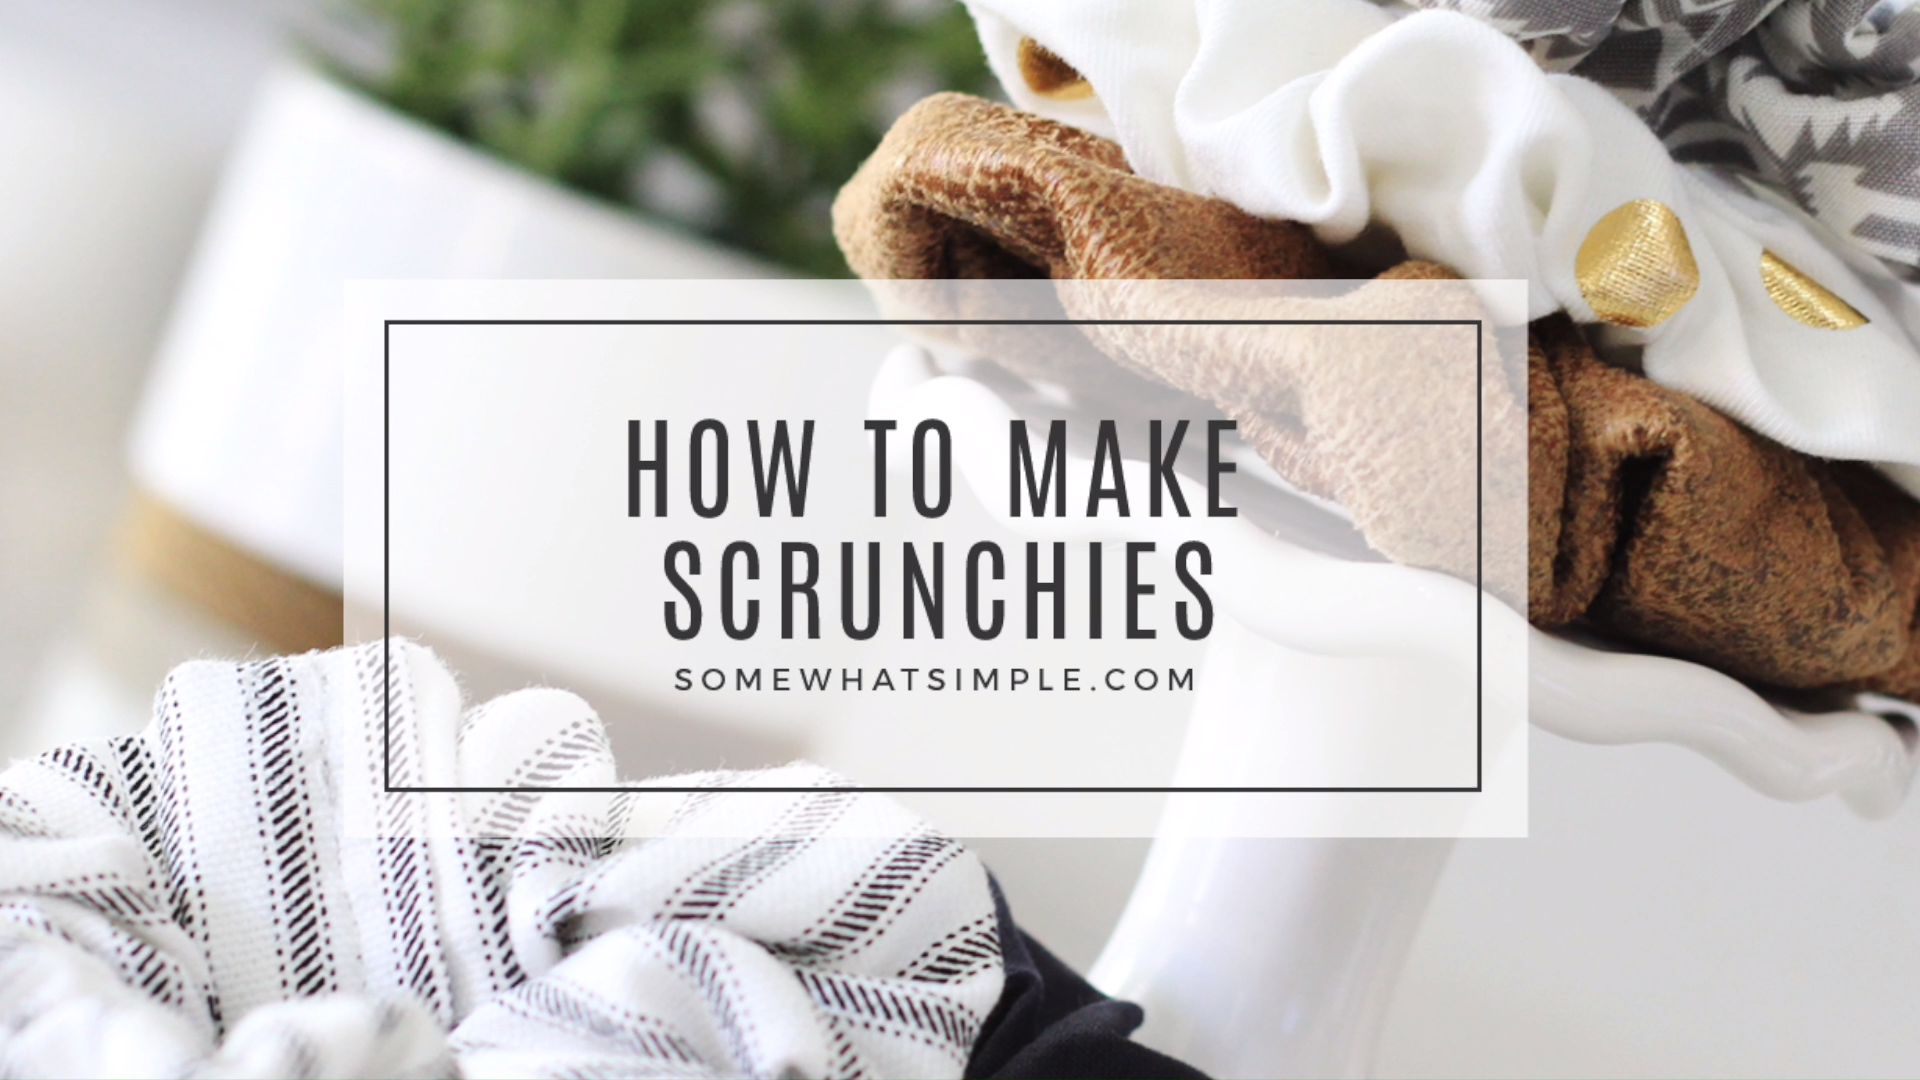 Easiest Way To Make A Scrunchie - Easiest Way To Make A Scrunchie -   15 diy Scrunchie step by step ideas